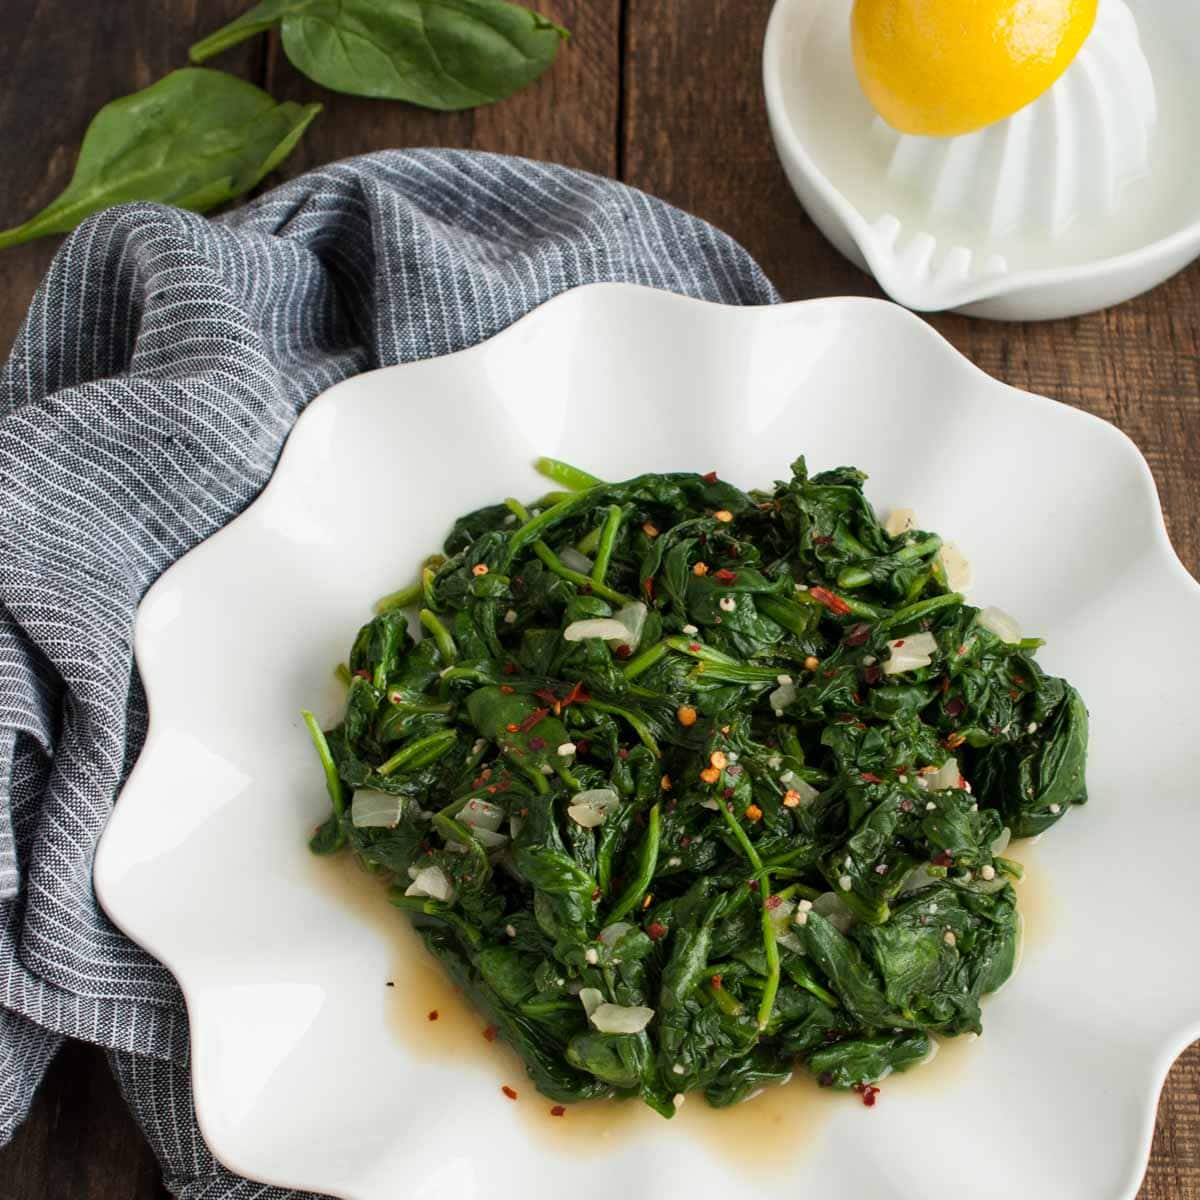 “10 Creative Ways to Enjoy Spinach Beyond Salads: From Smoothies to Sushi Rolls!”